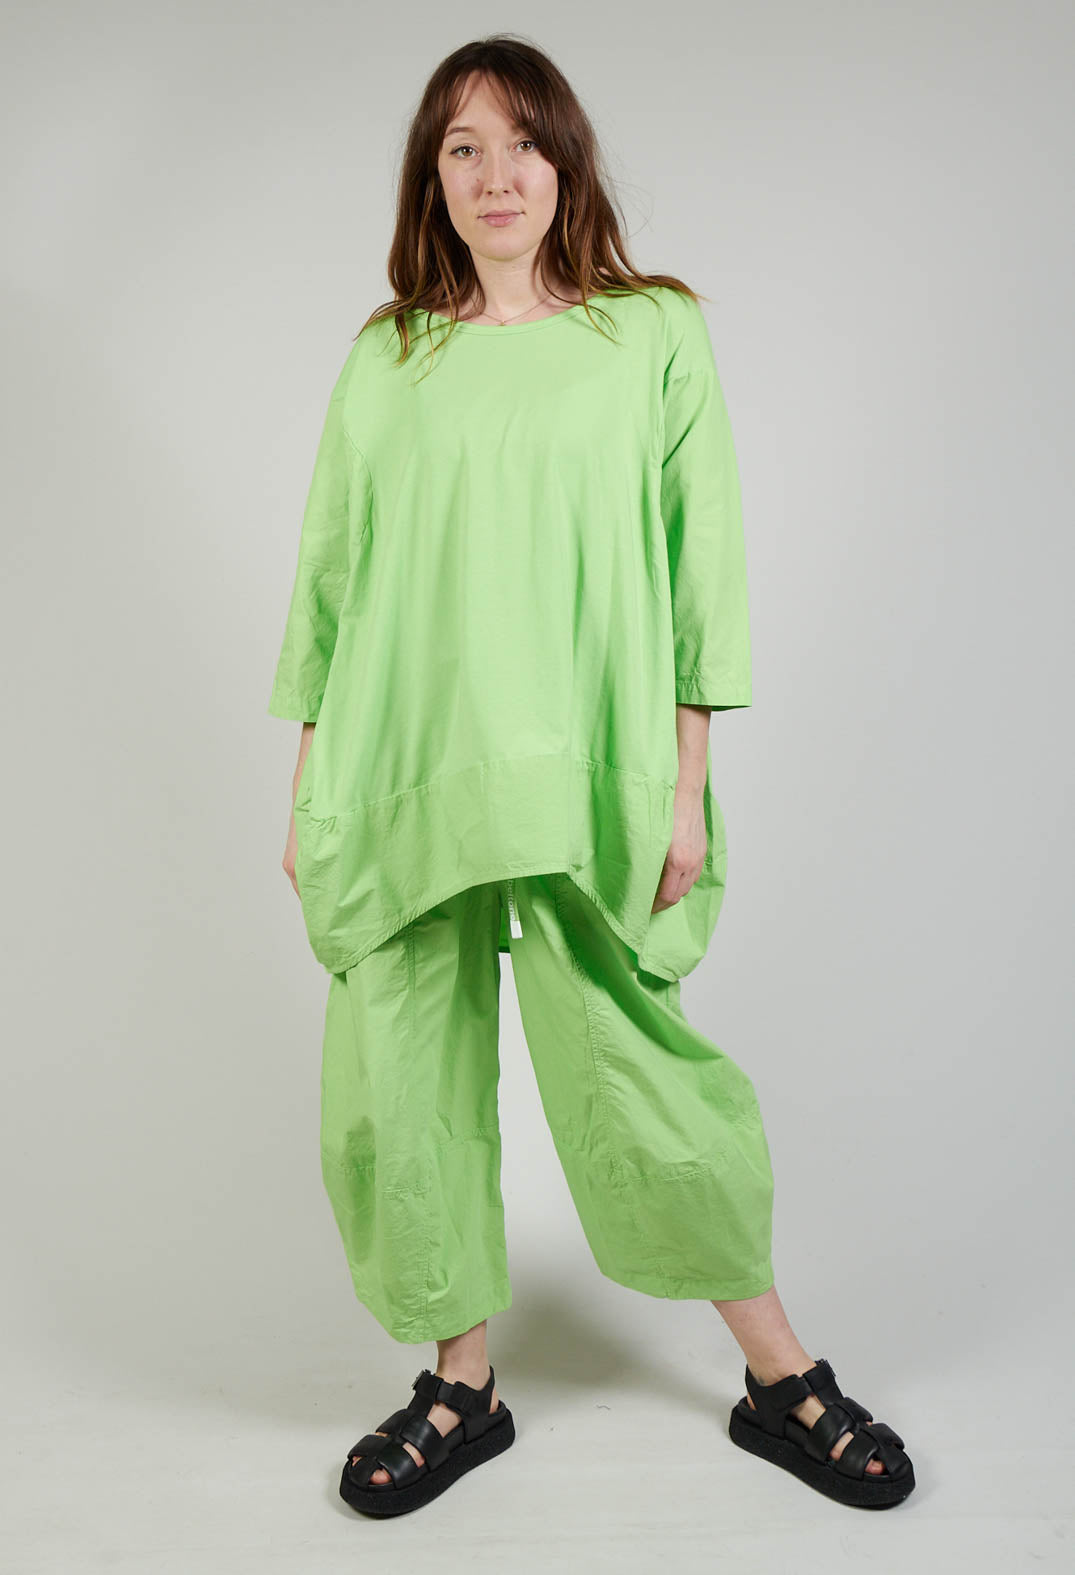 Dual Fabric Relaxed Fit T Shirt in Lime